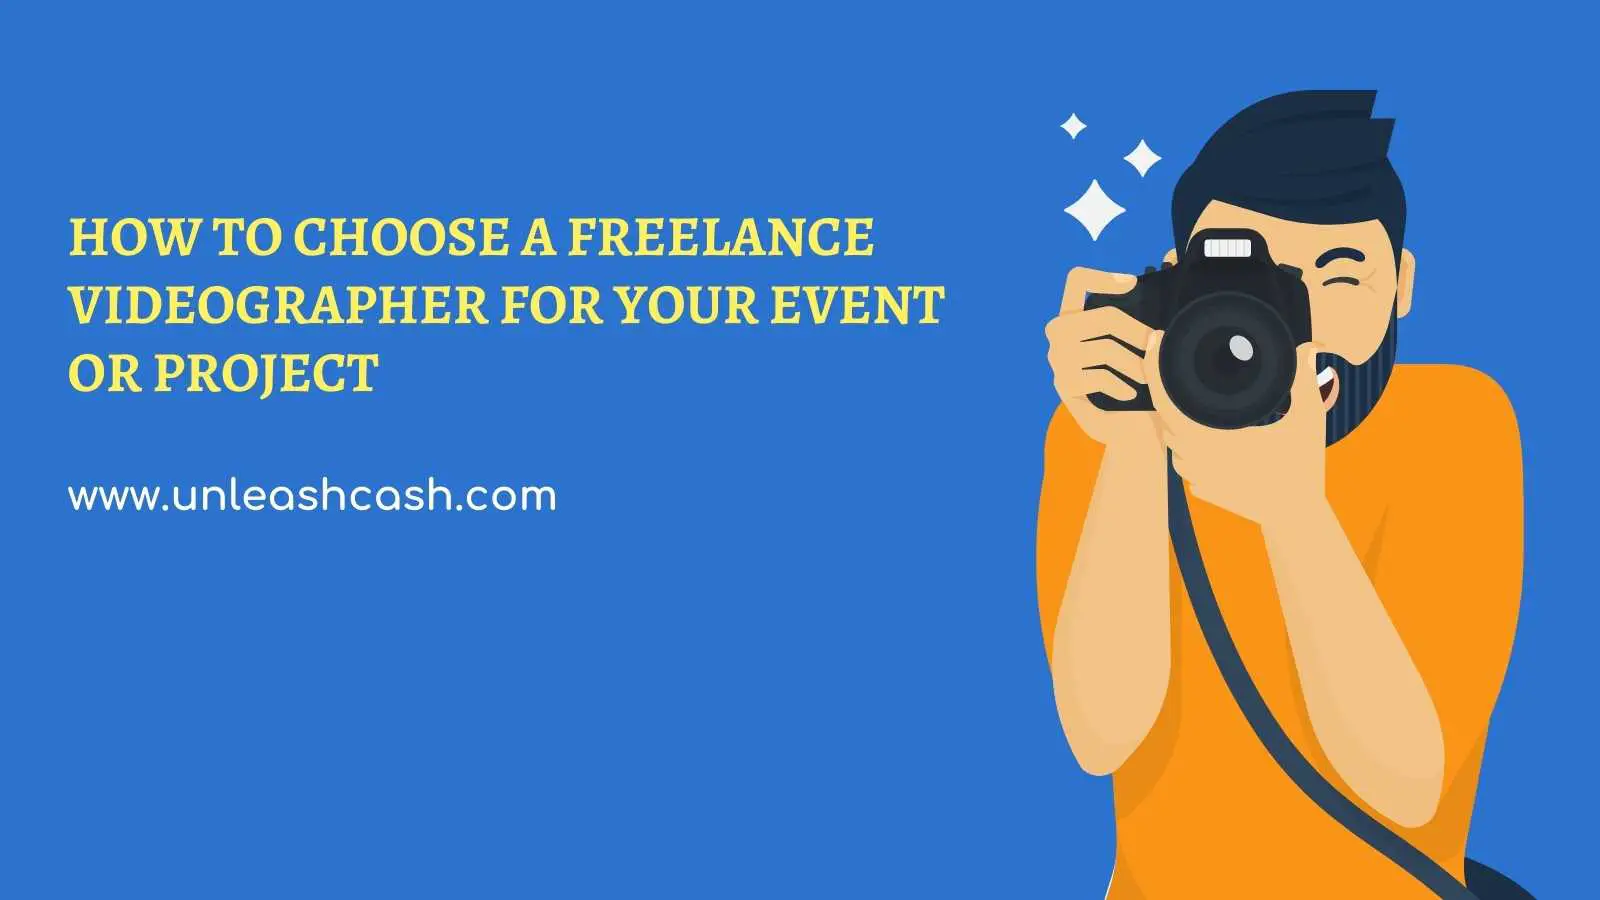 How To Choose A Freelance Videographer For Your Event Or Project